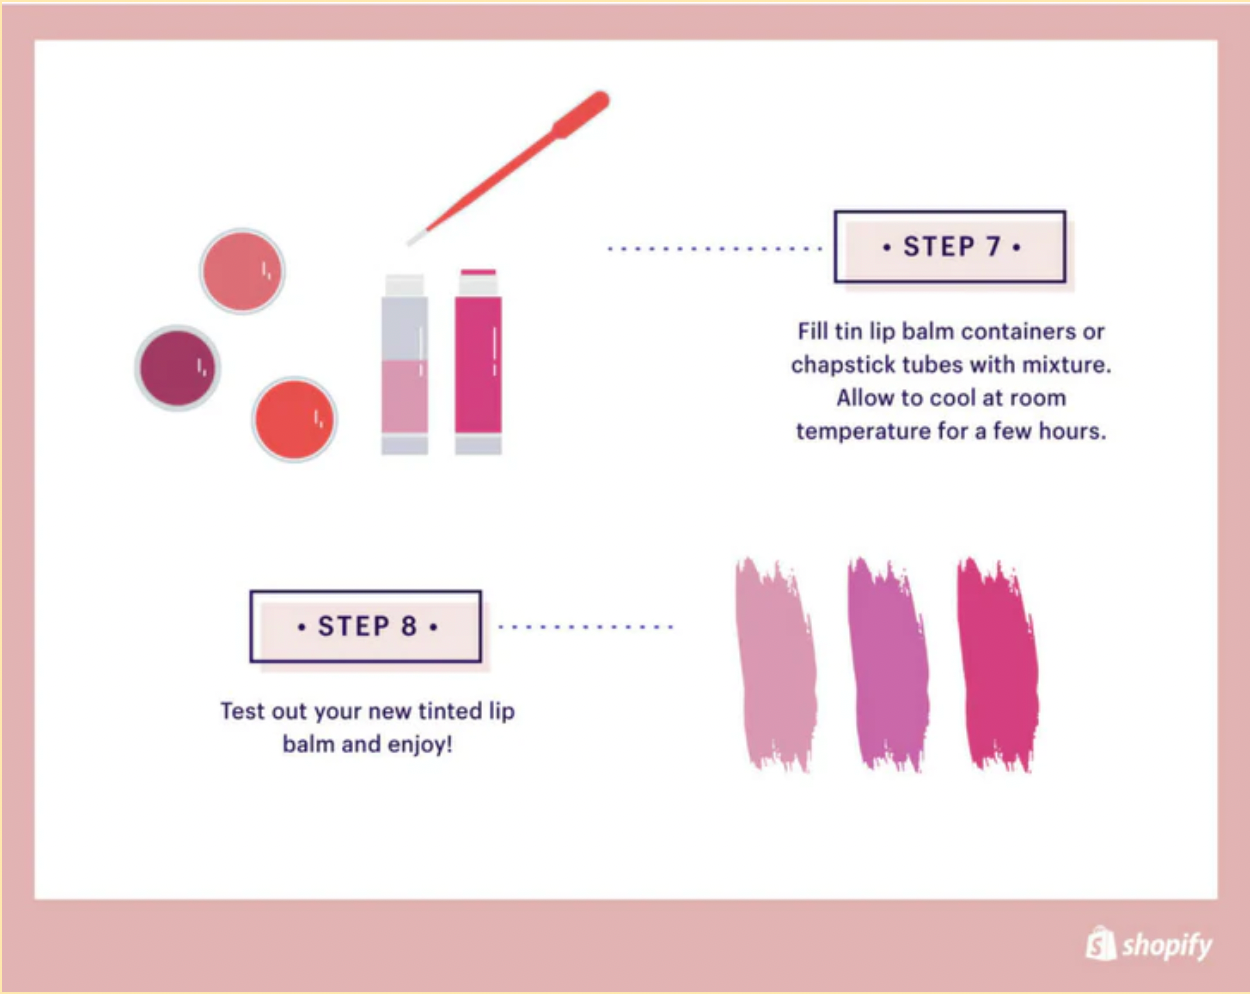 Illustration of steps 7 and 8 of making lip balm, potting mixture